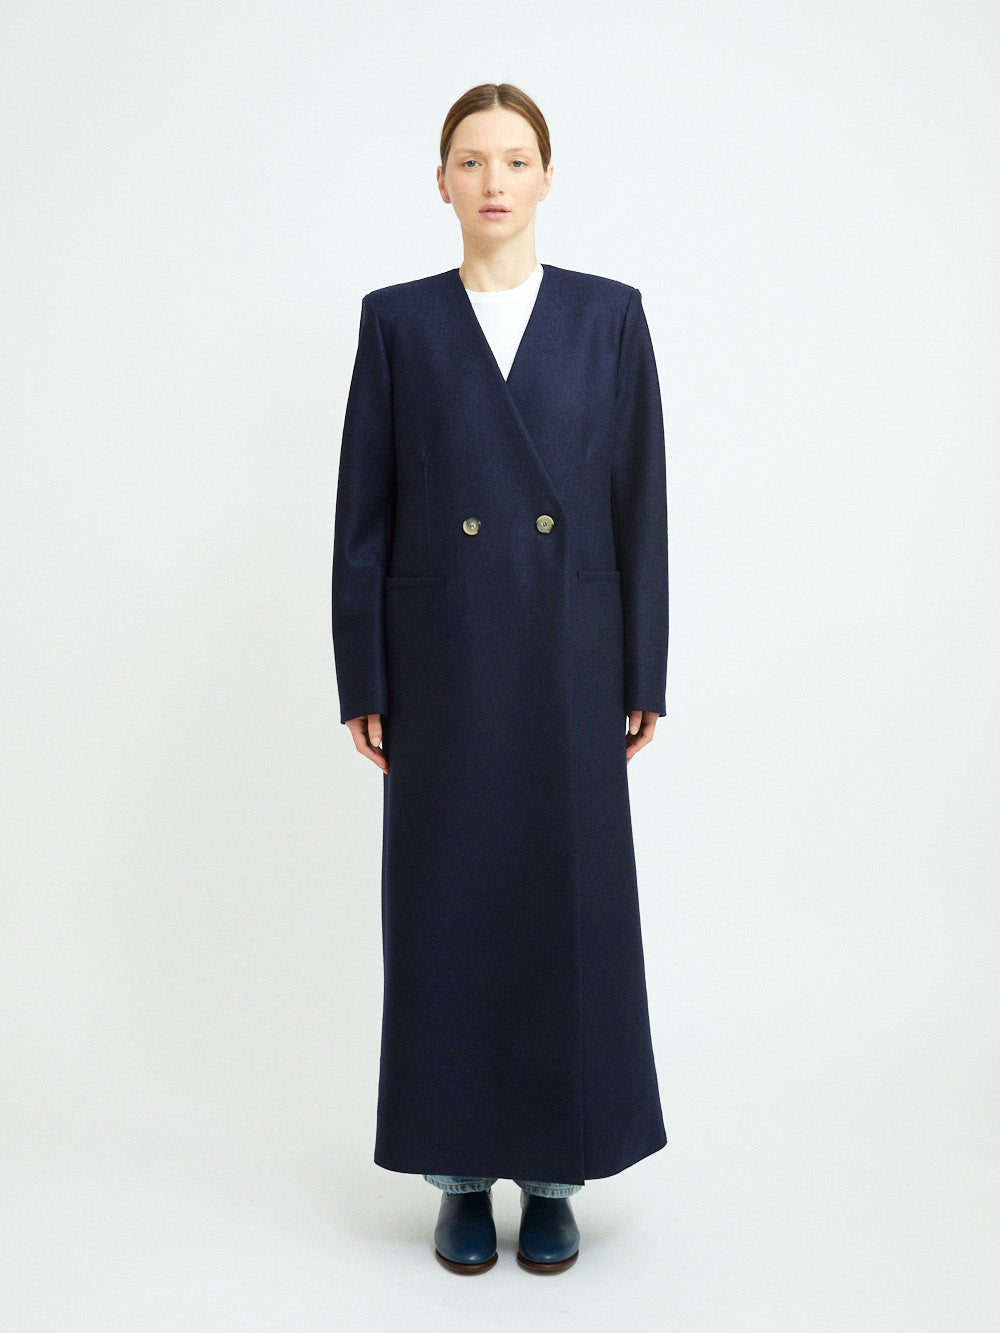 MANTEAU UNCOLLARED NAVY BLUE